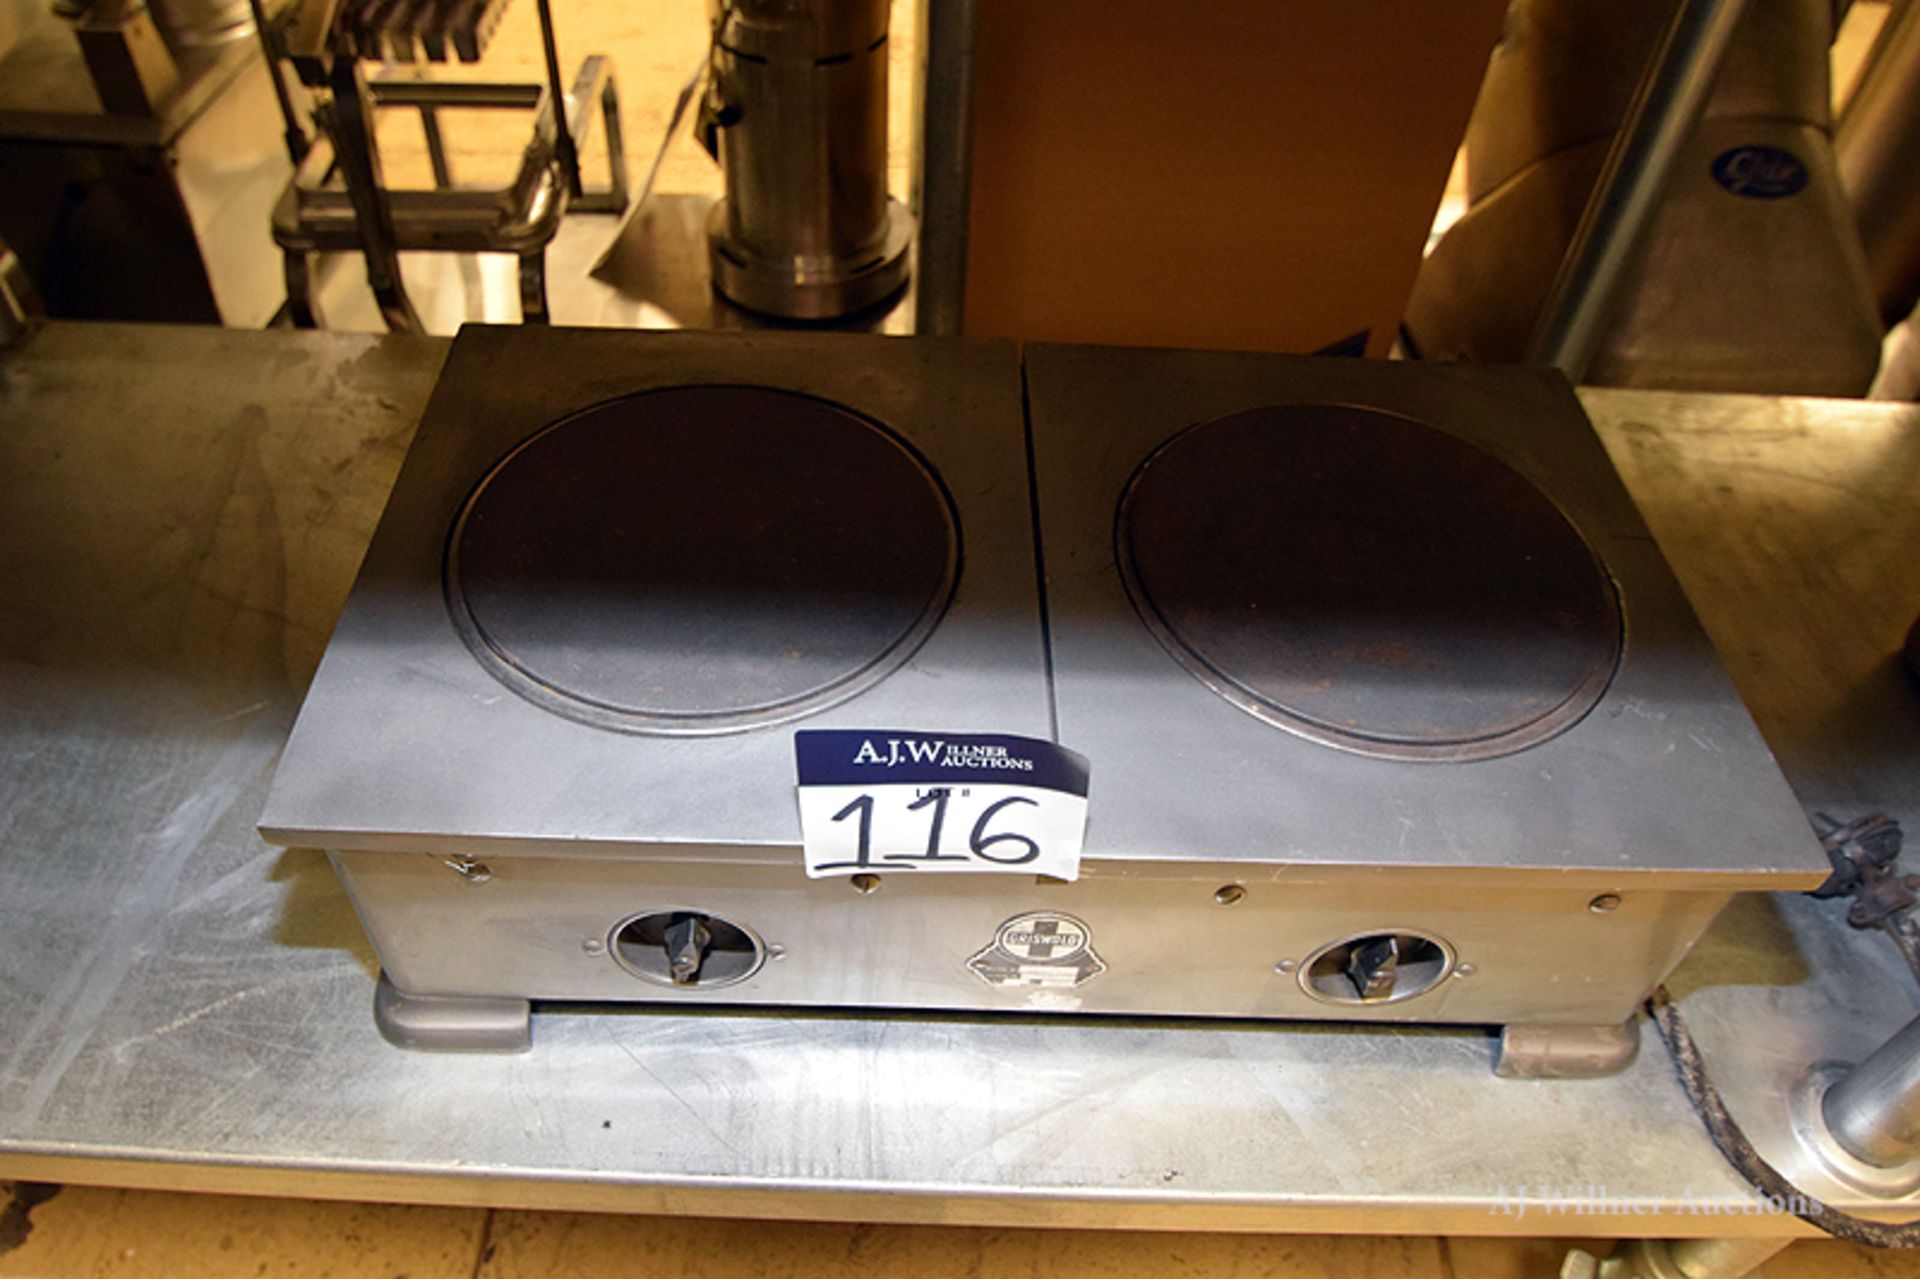 Griswold Table-Top Electric Dual Range